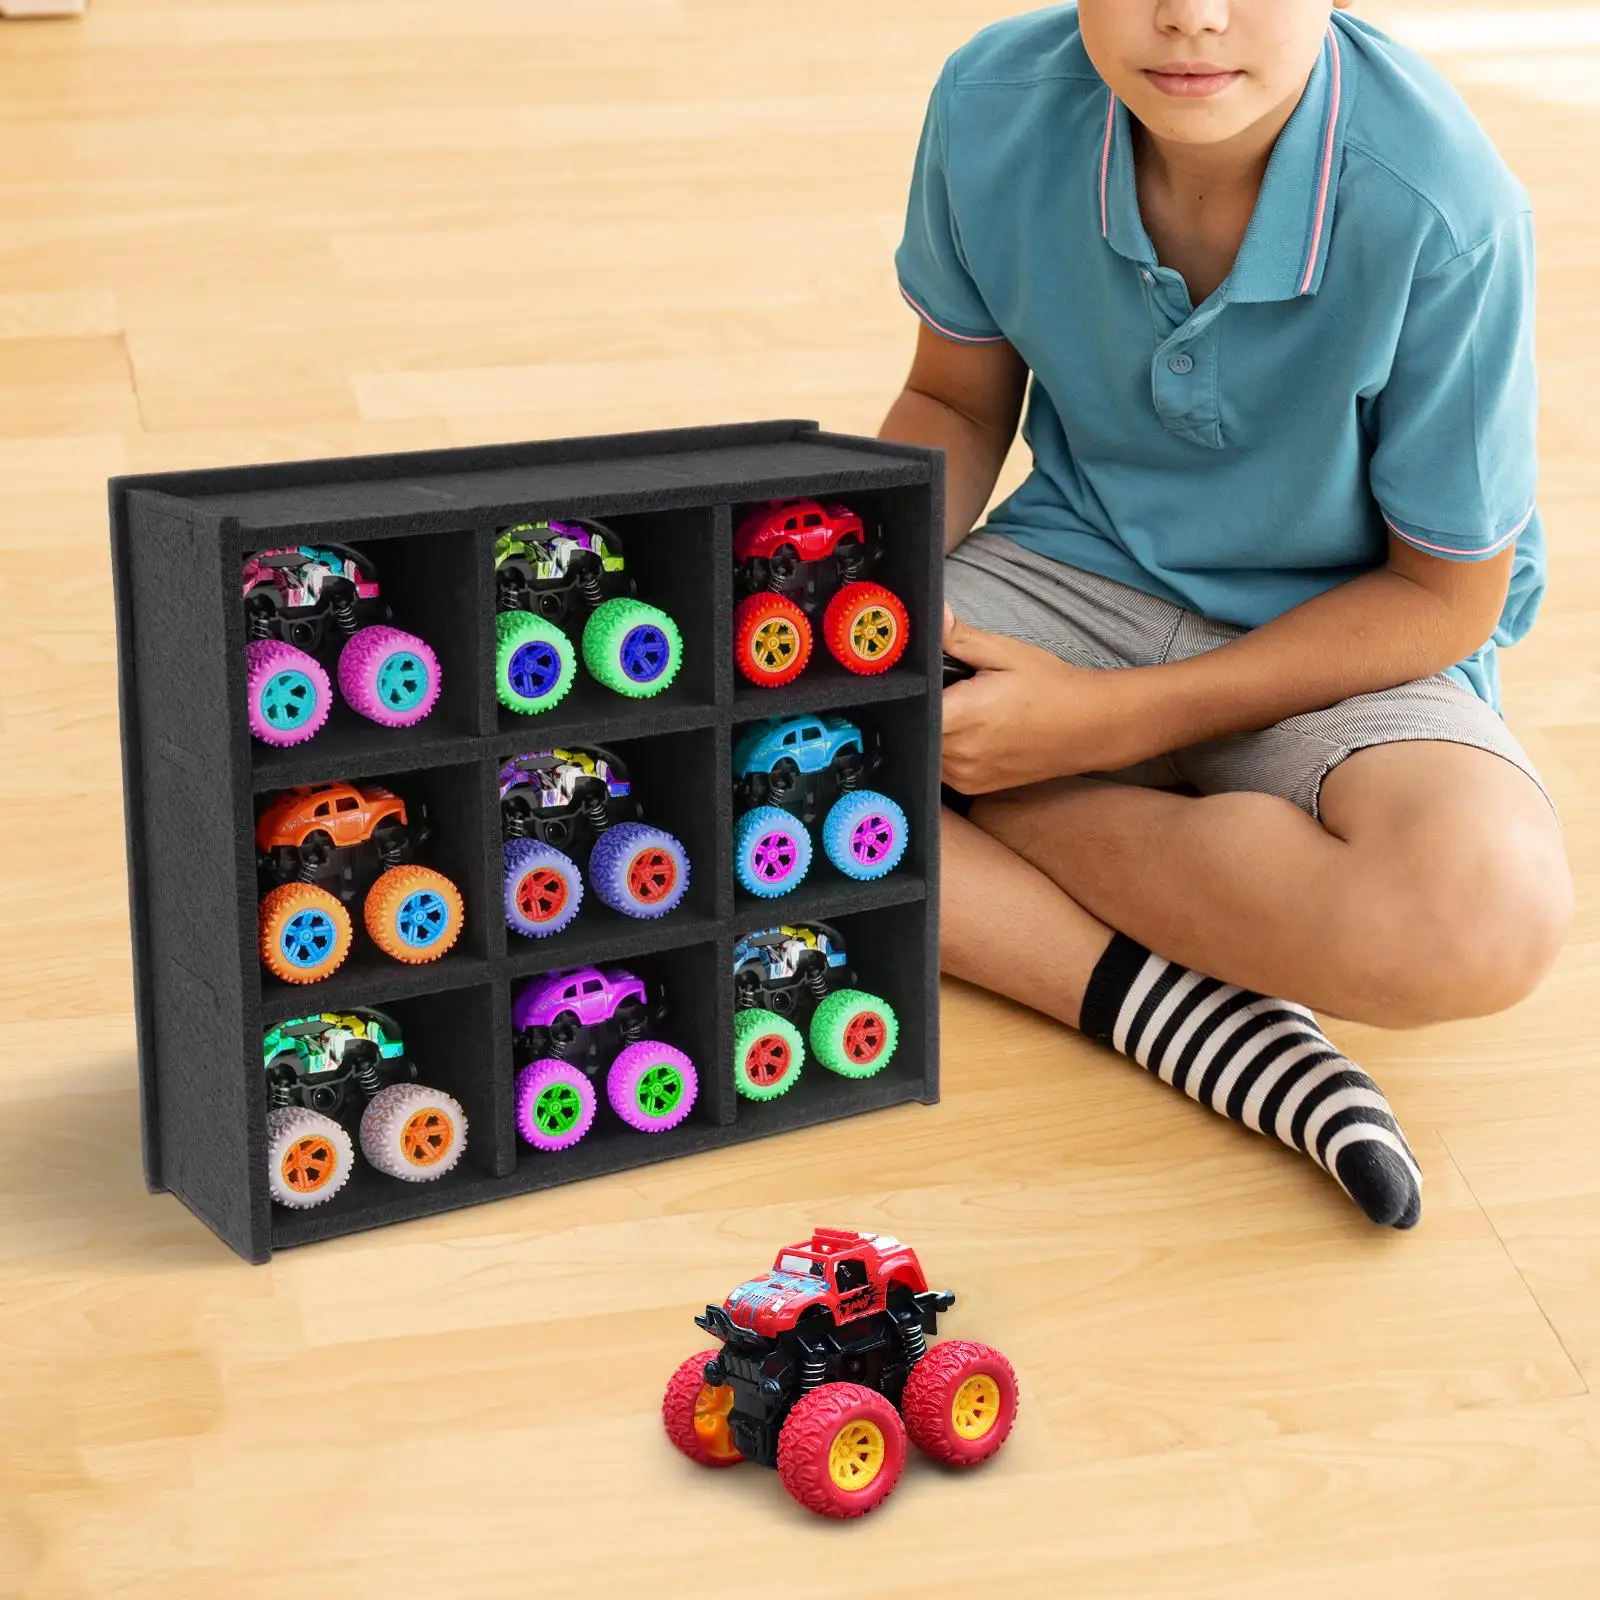 Toy Trucks Door Wall Mounted Storage Case Felt Material for Displaying